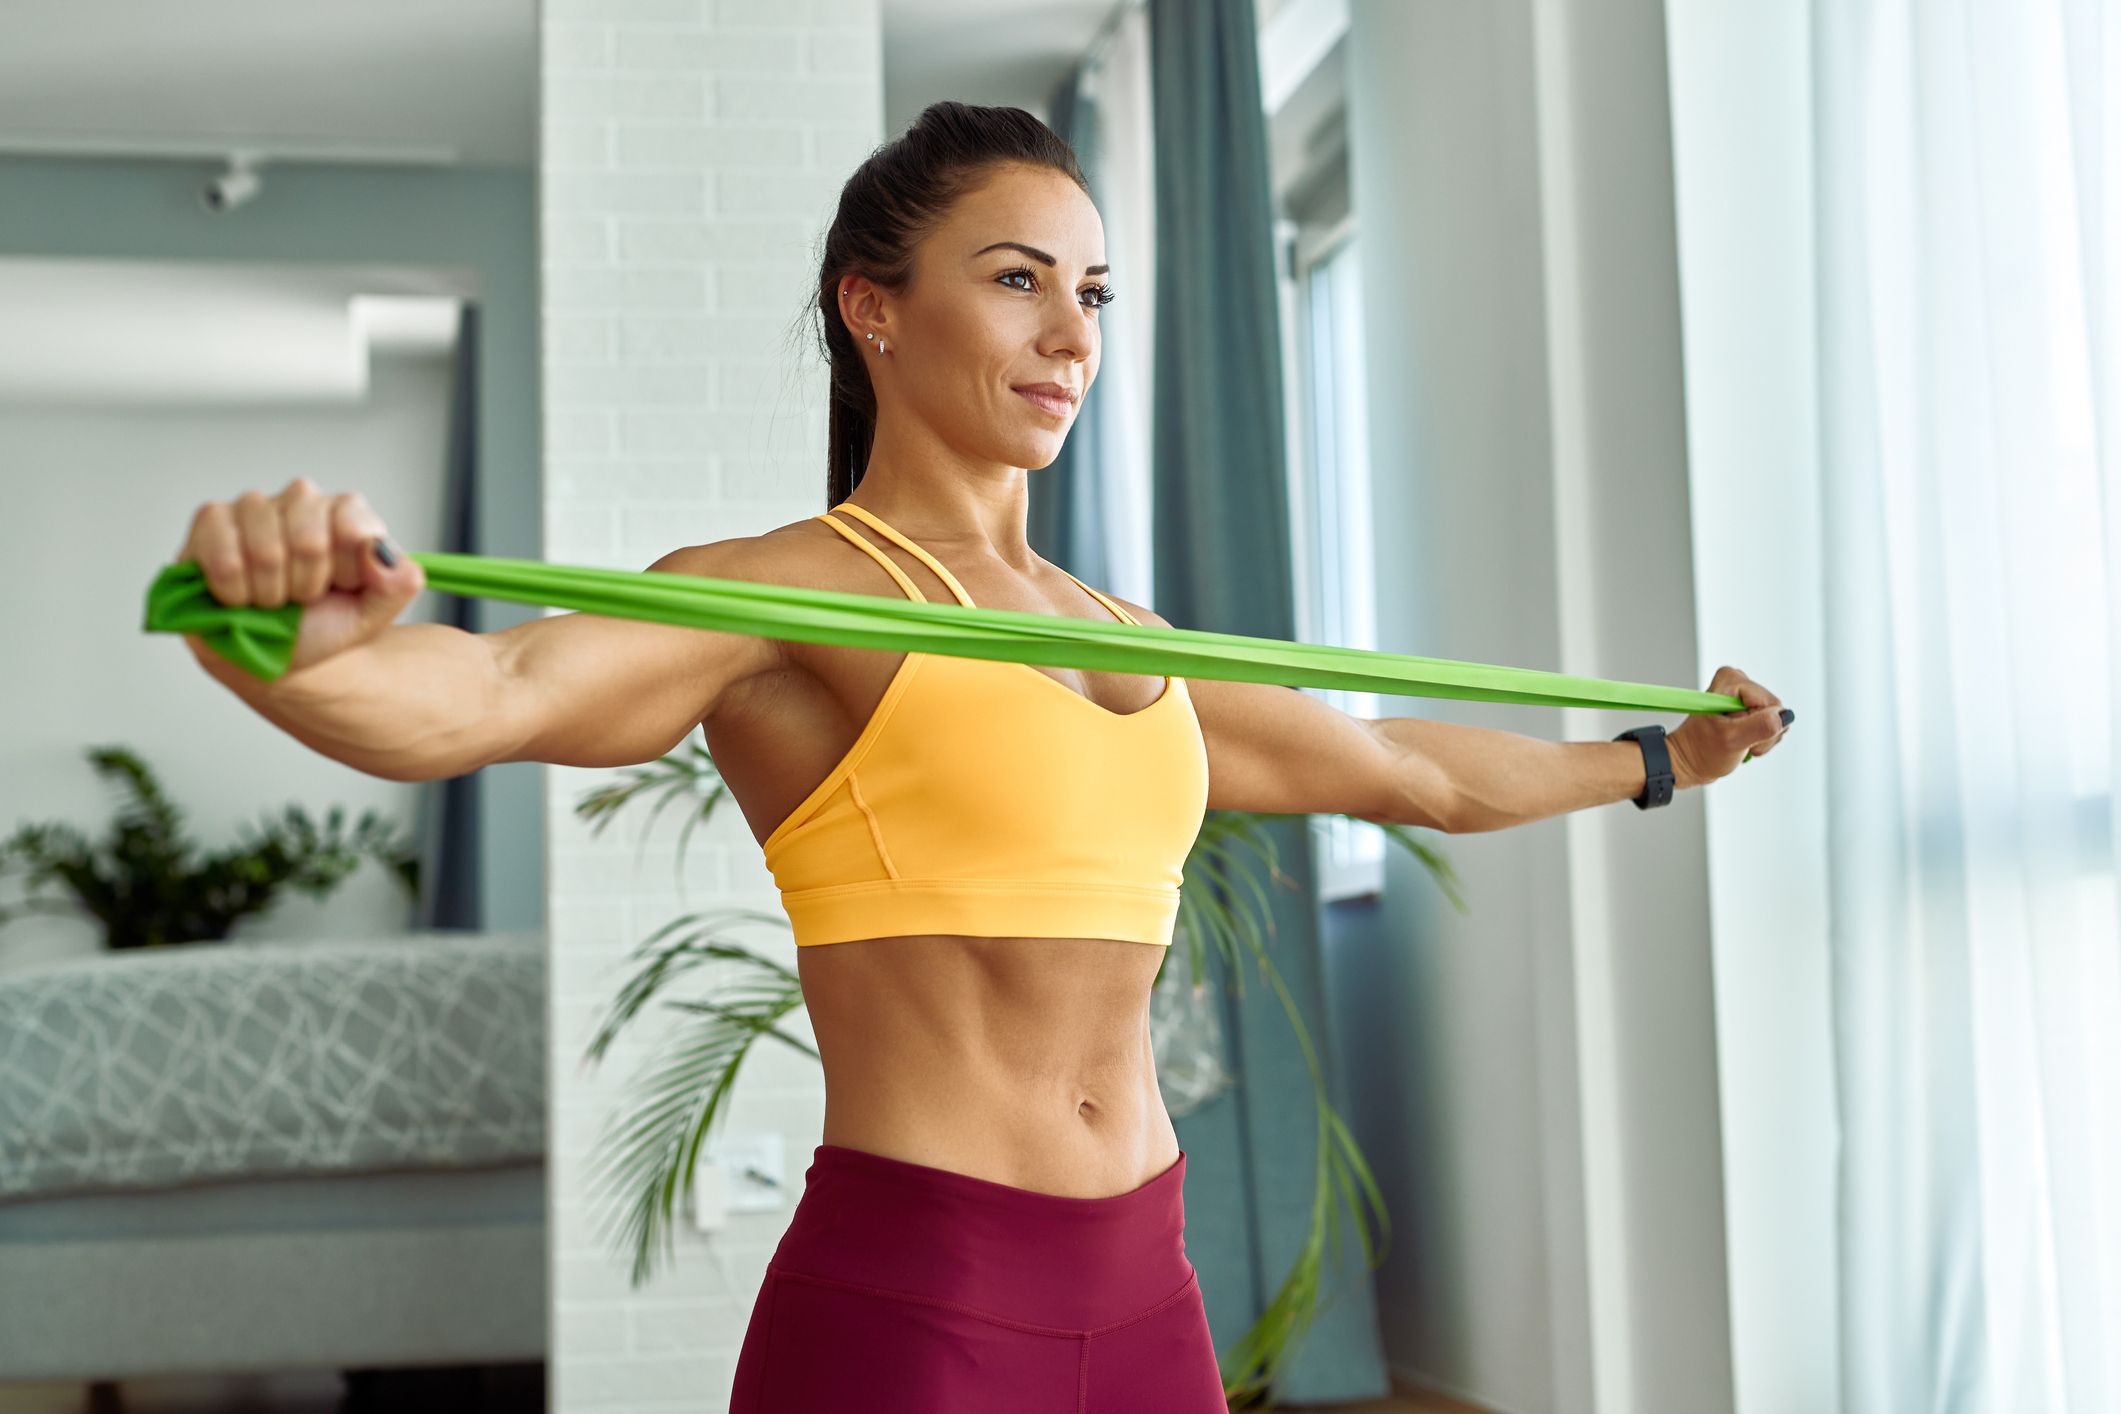 5 Best Resistance Band Exercises